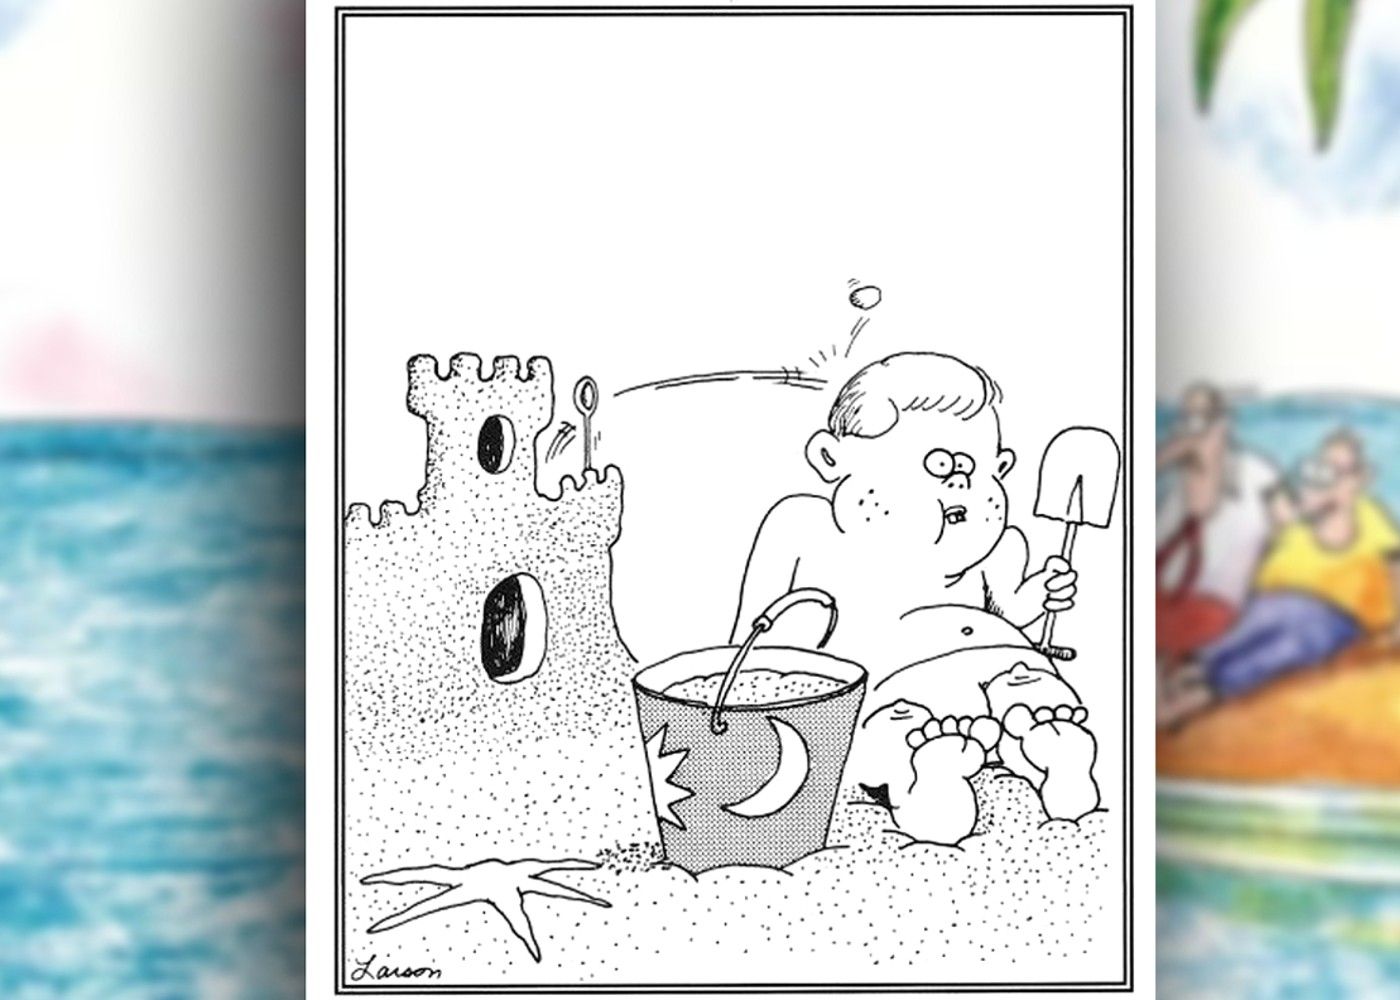 the far side comic where a kid is shot by a catapult from within his own sand castle